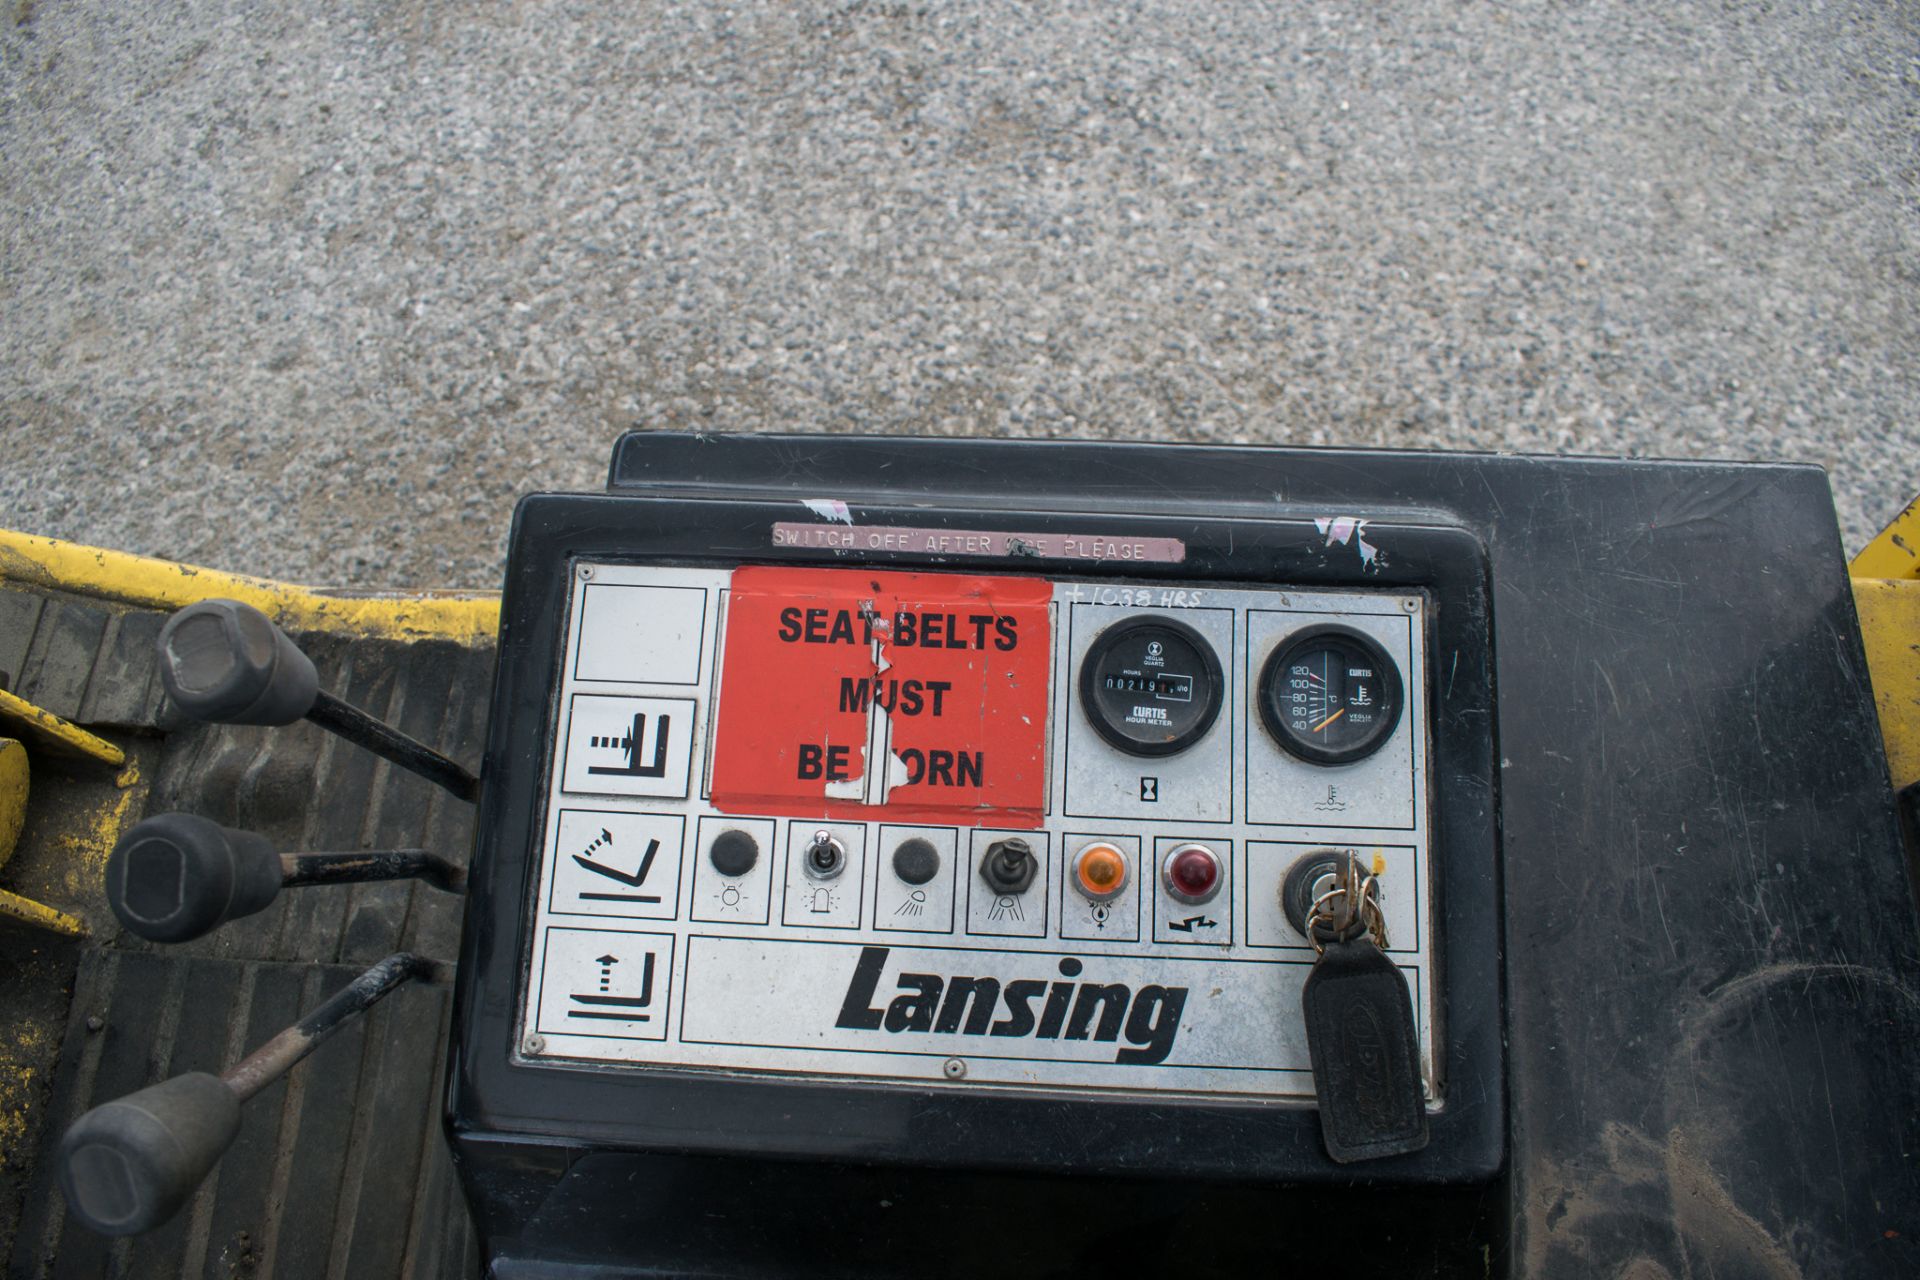 Lansing 7/2.5 2.5 tonne gas powered fork lift truck S/N: 36725 Recorded Hours: 219 - Image 12 of 12